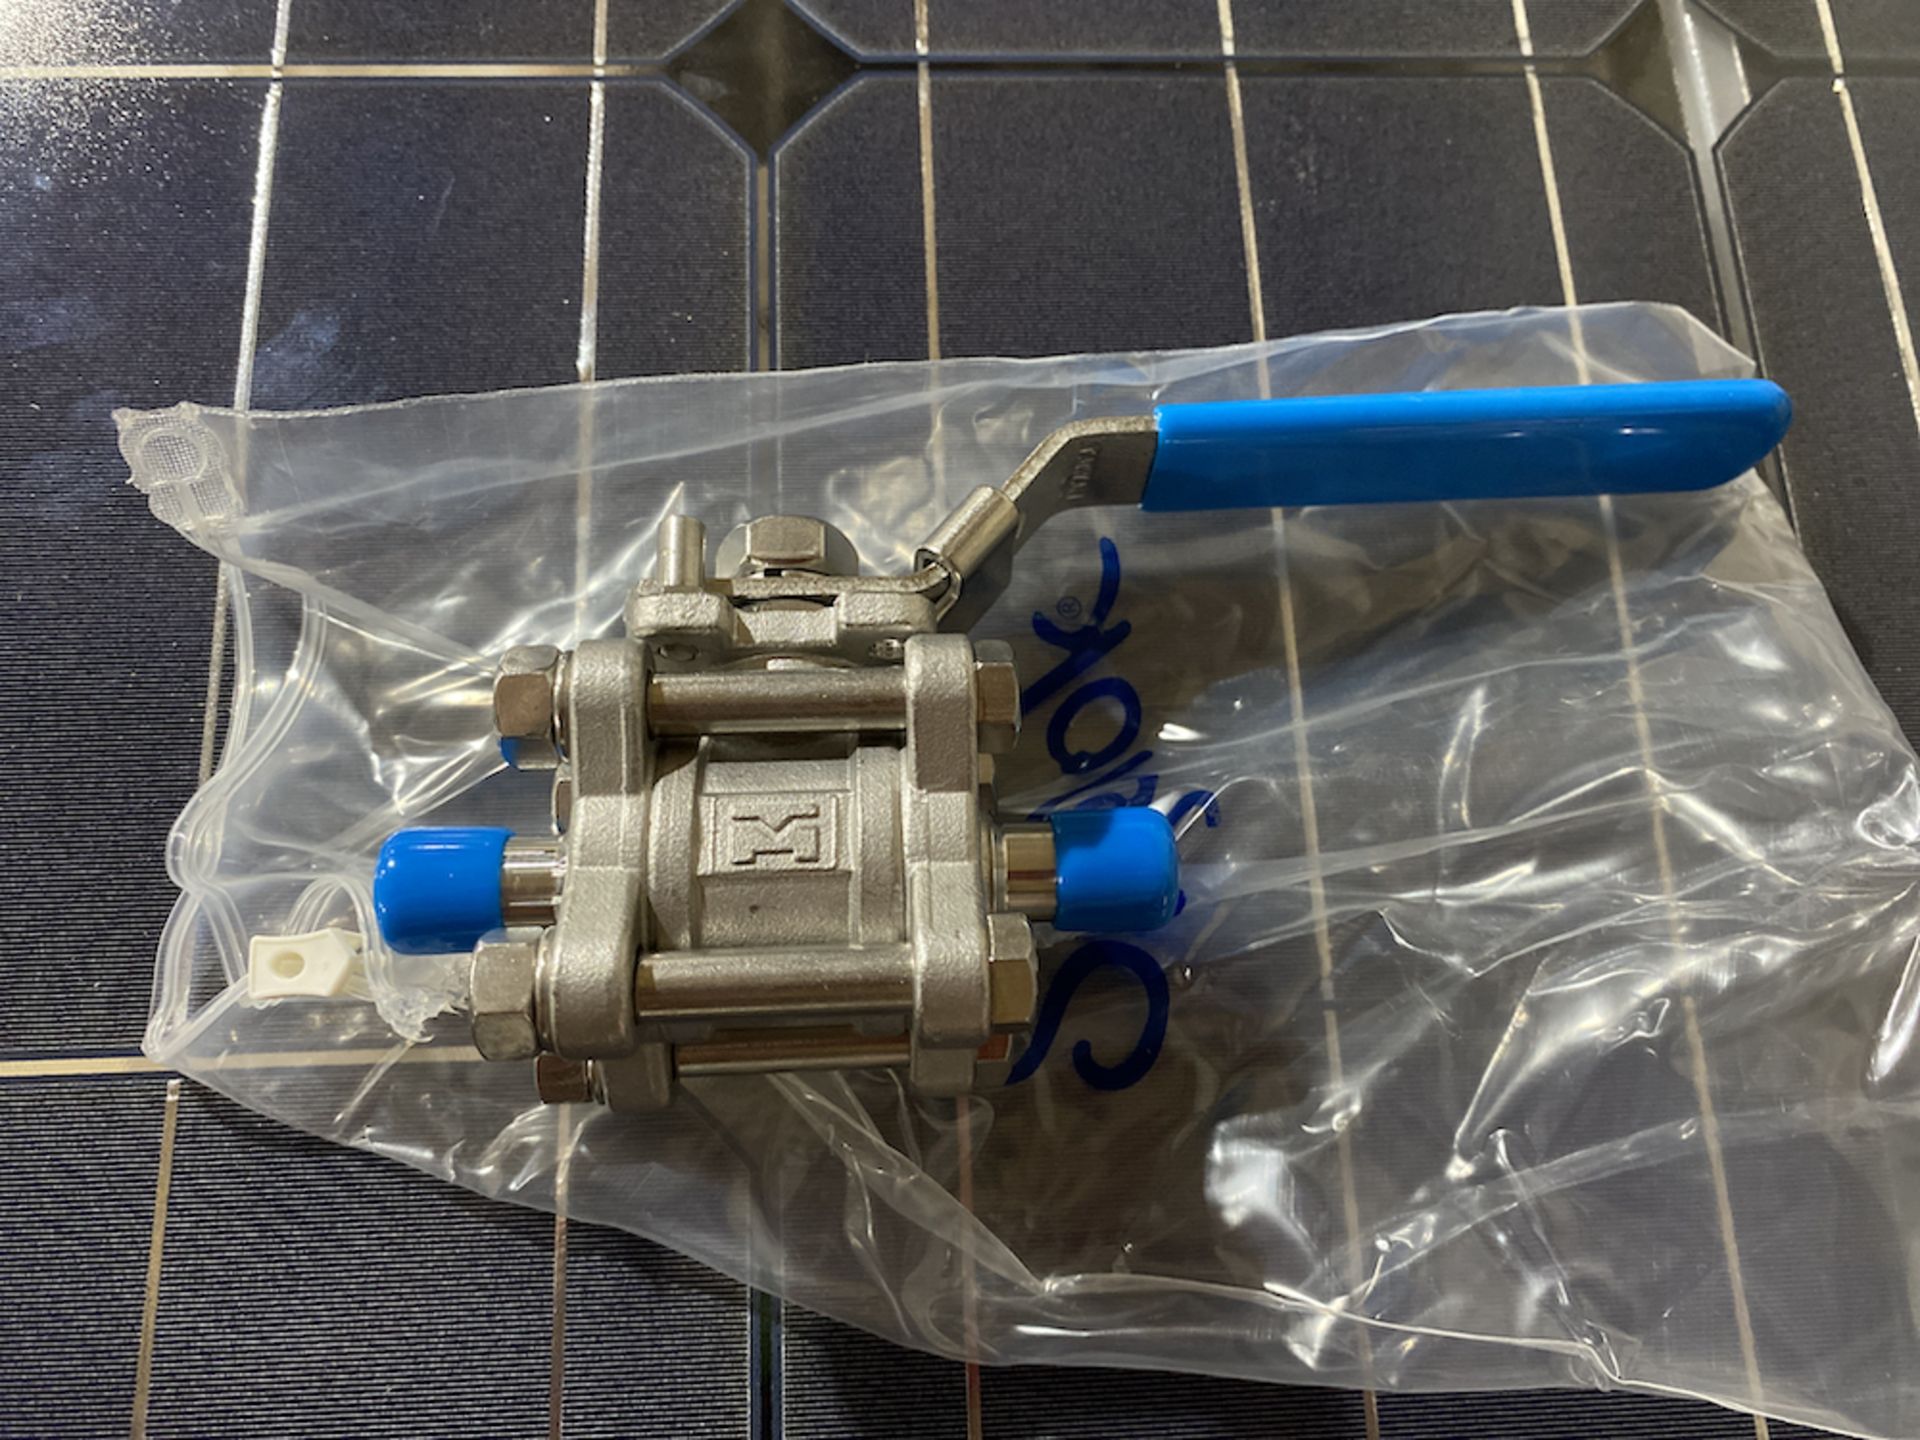 NEW IN THE BOX LOT OF 2 SWAGELOK JBV650 STAINLESS STEEL BALL VALVES - Image 3 of 3